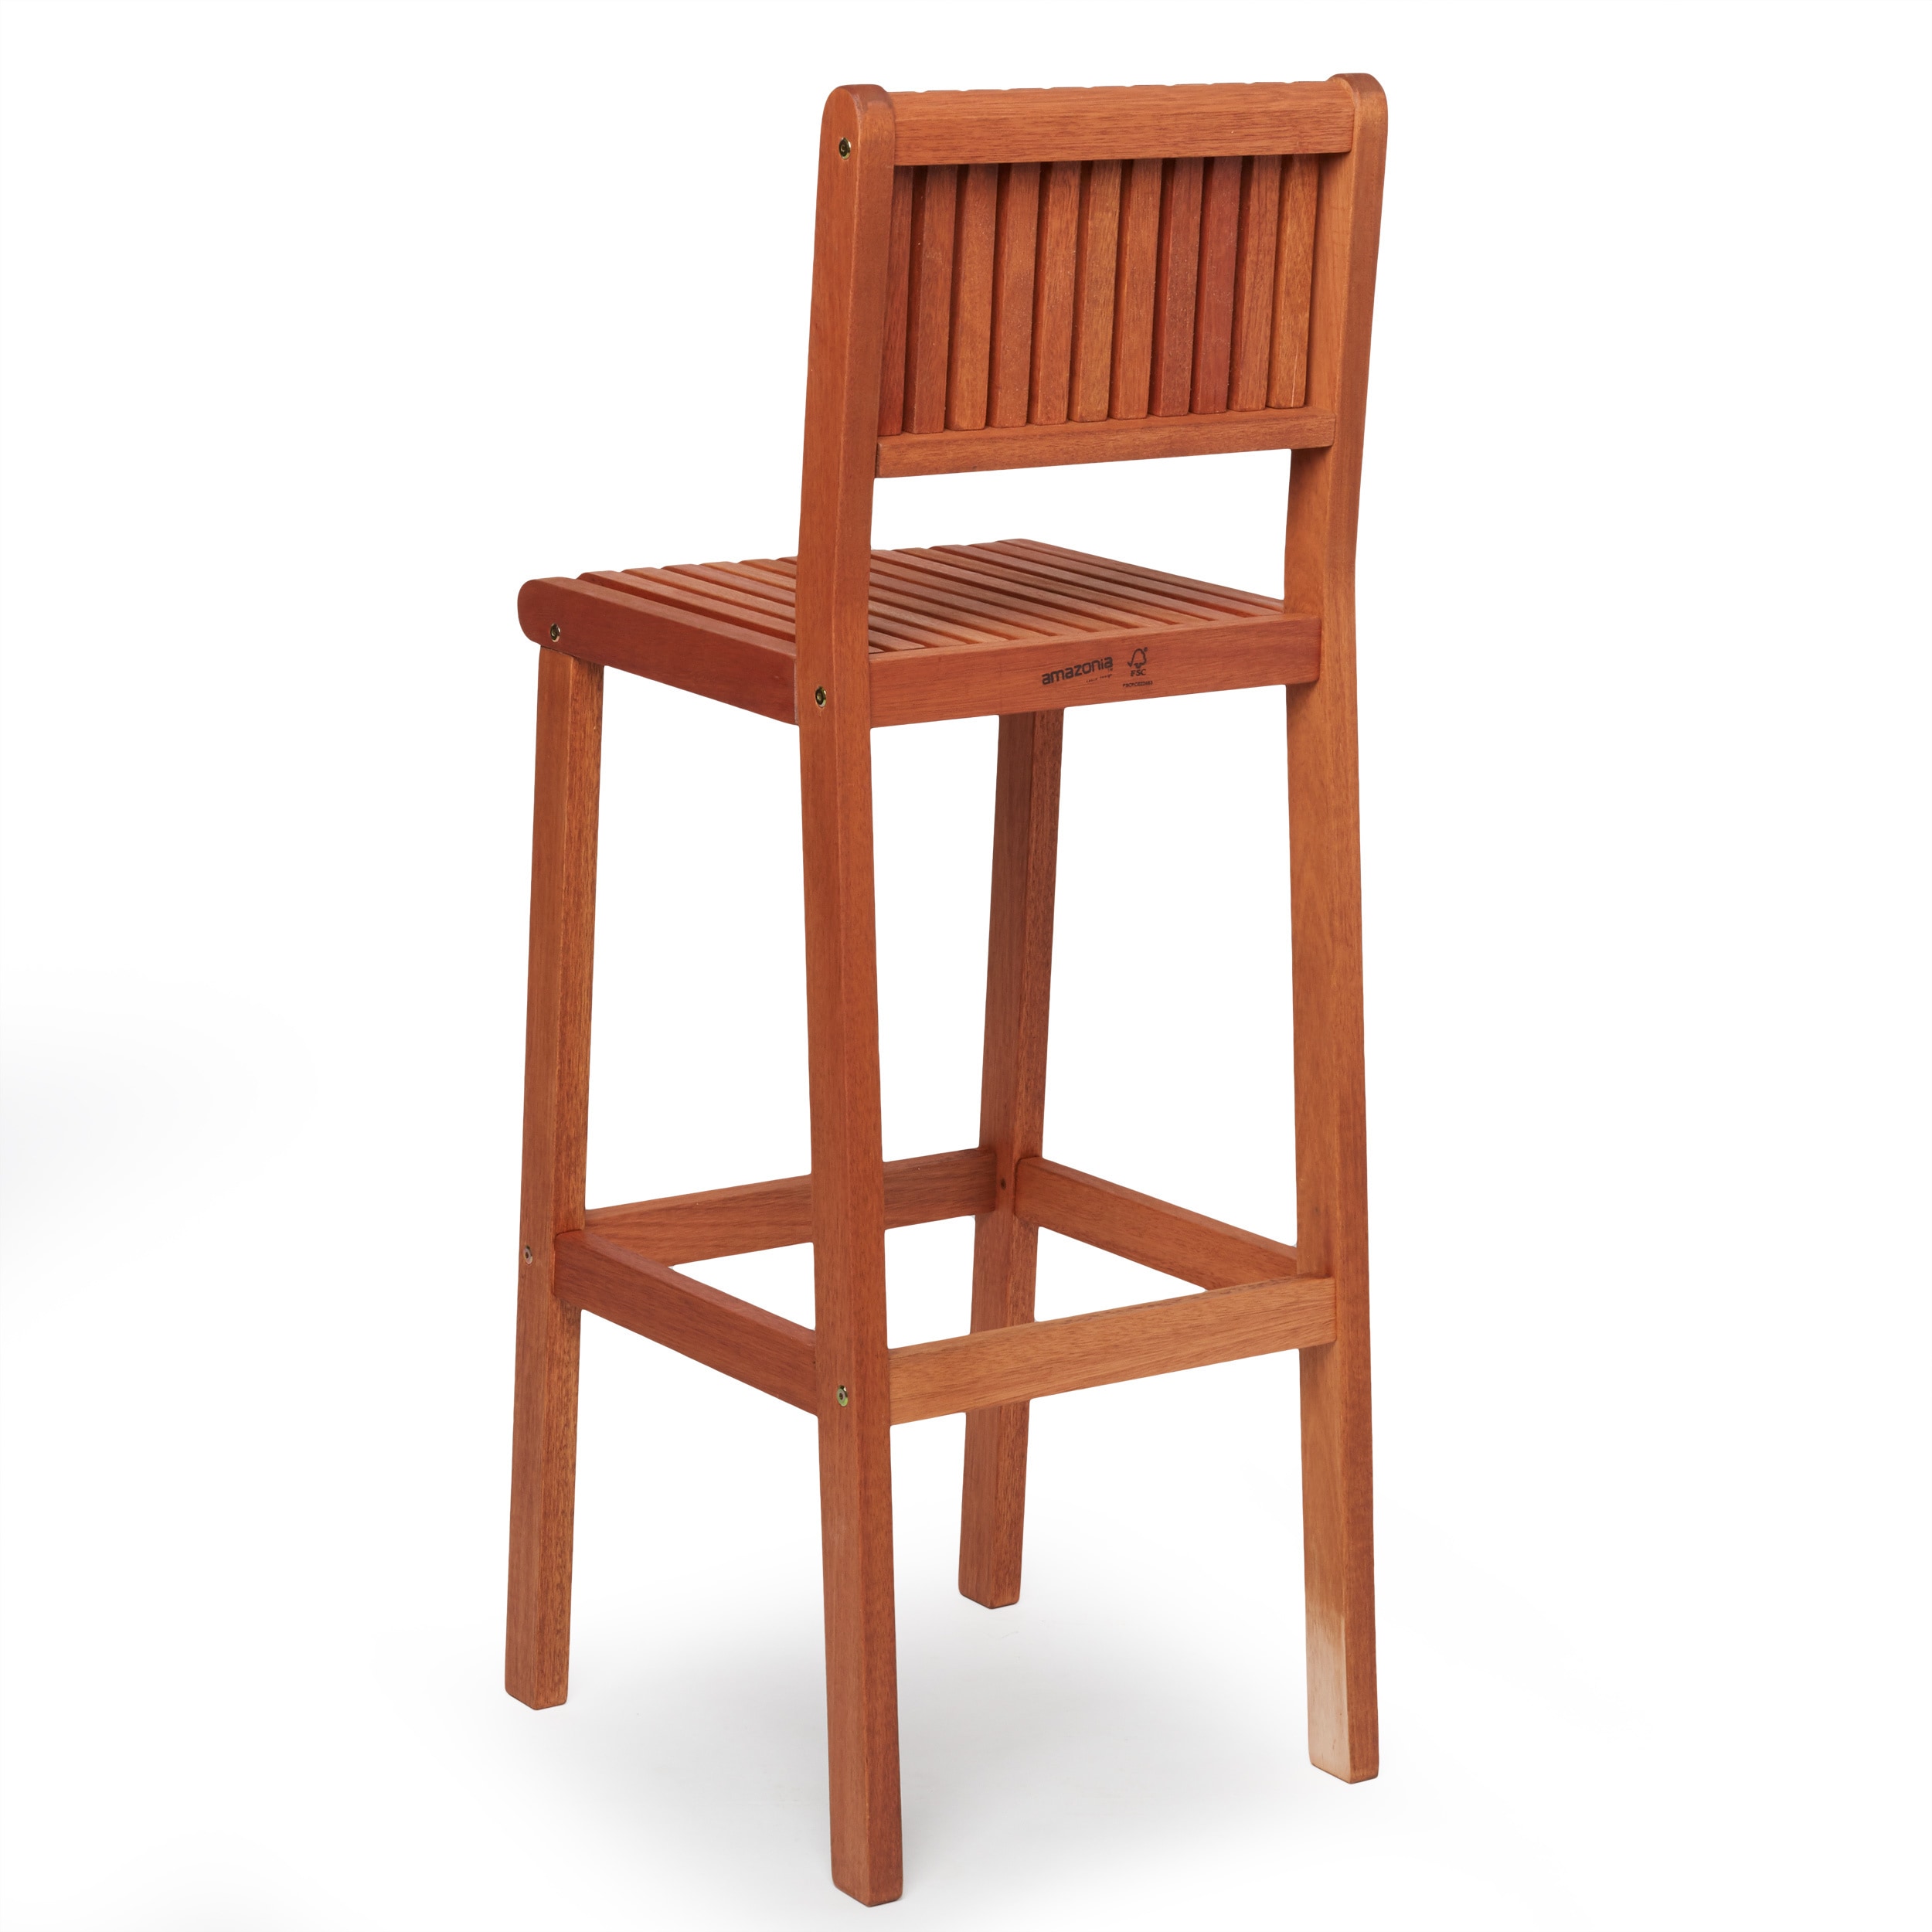 Amazonia Milano 1-Piece Patio Barstool | Eucalyptus Wood | Ideal for Outdoors and Indoors - image 5 of 8